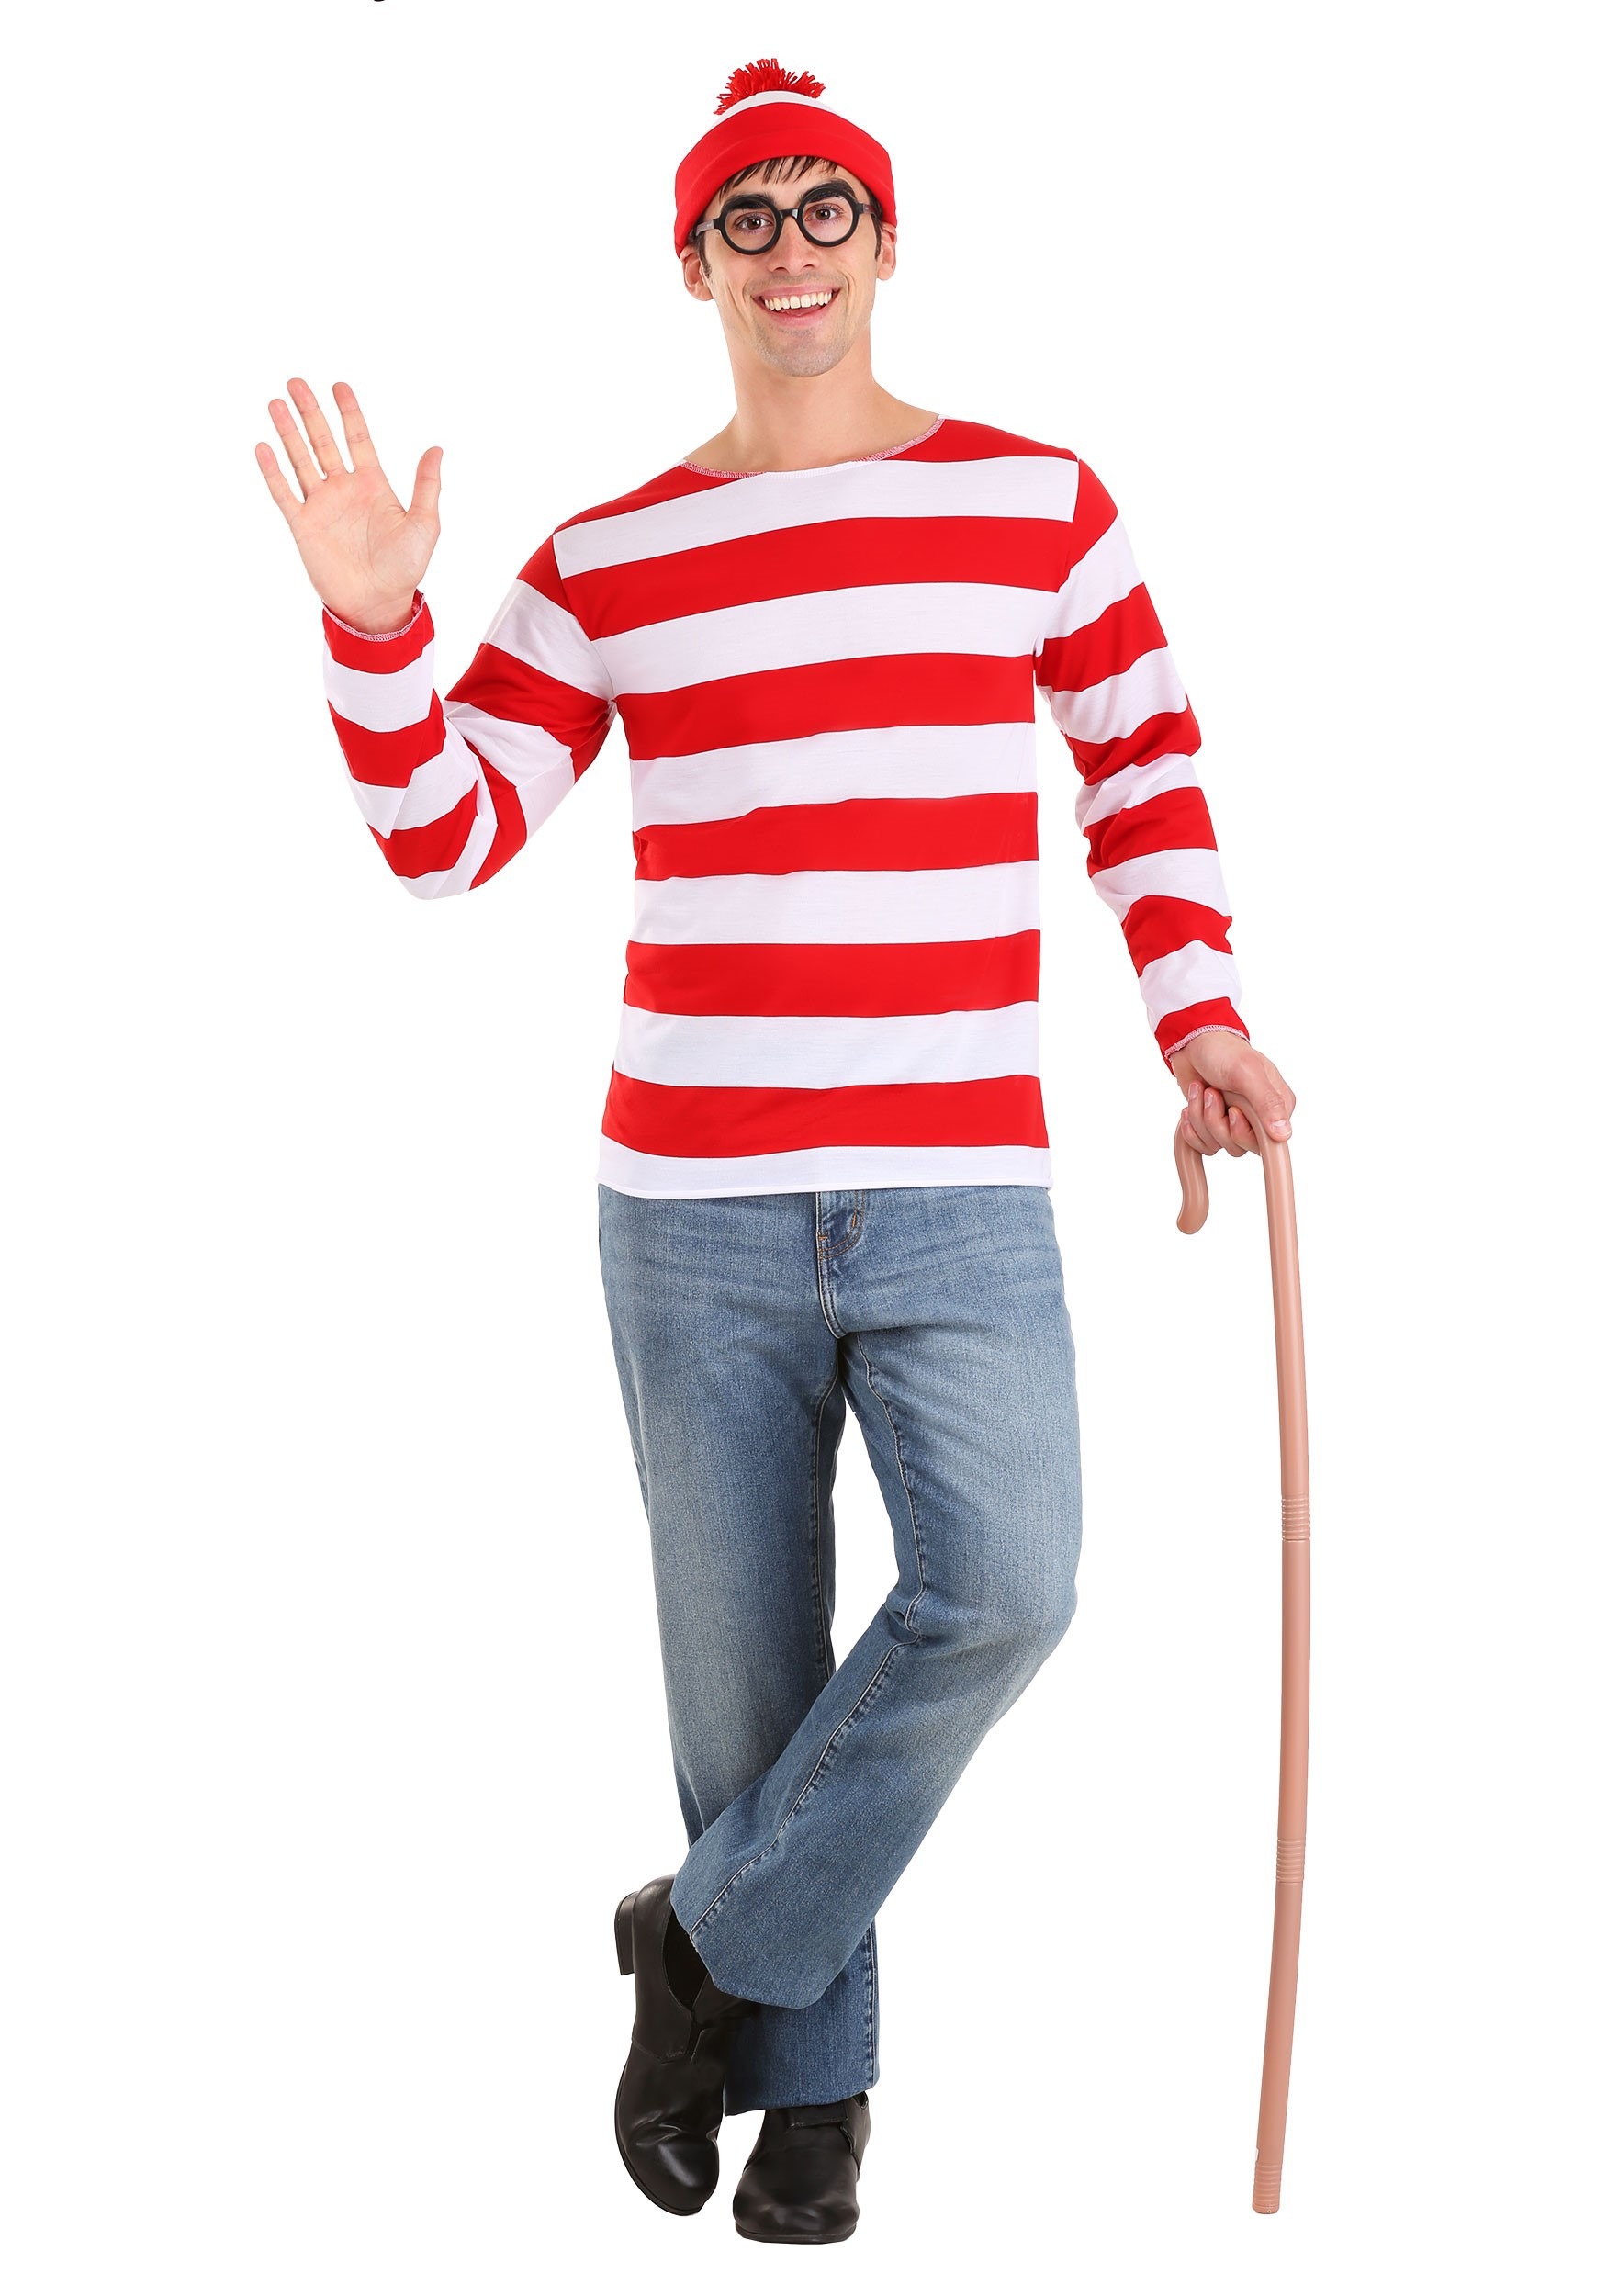 Where's Waldo Costume for Adults